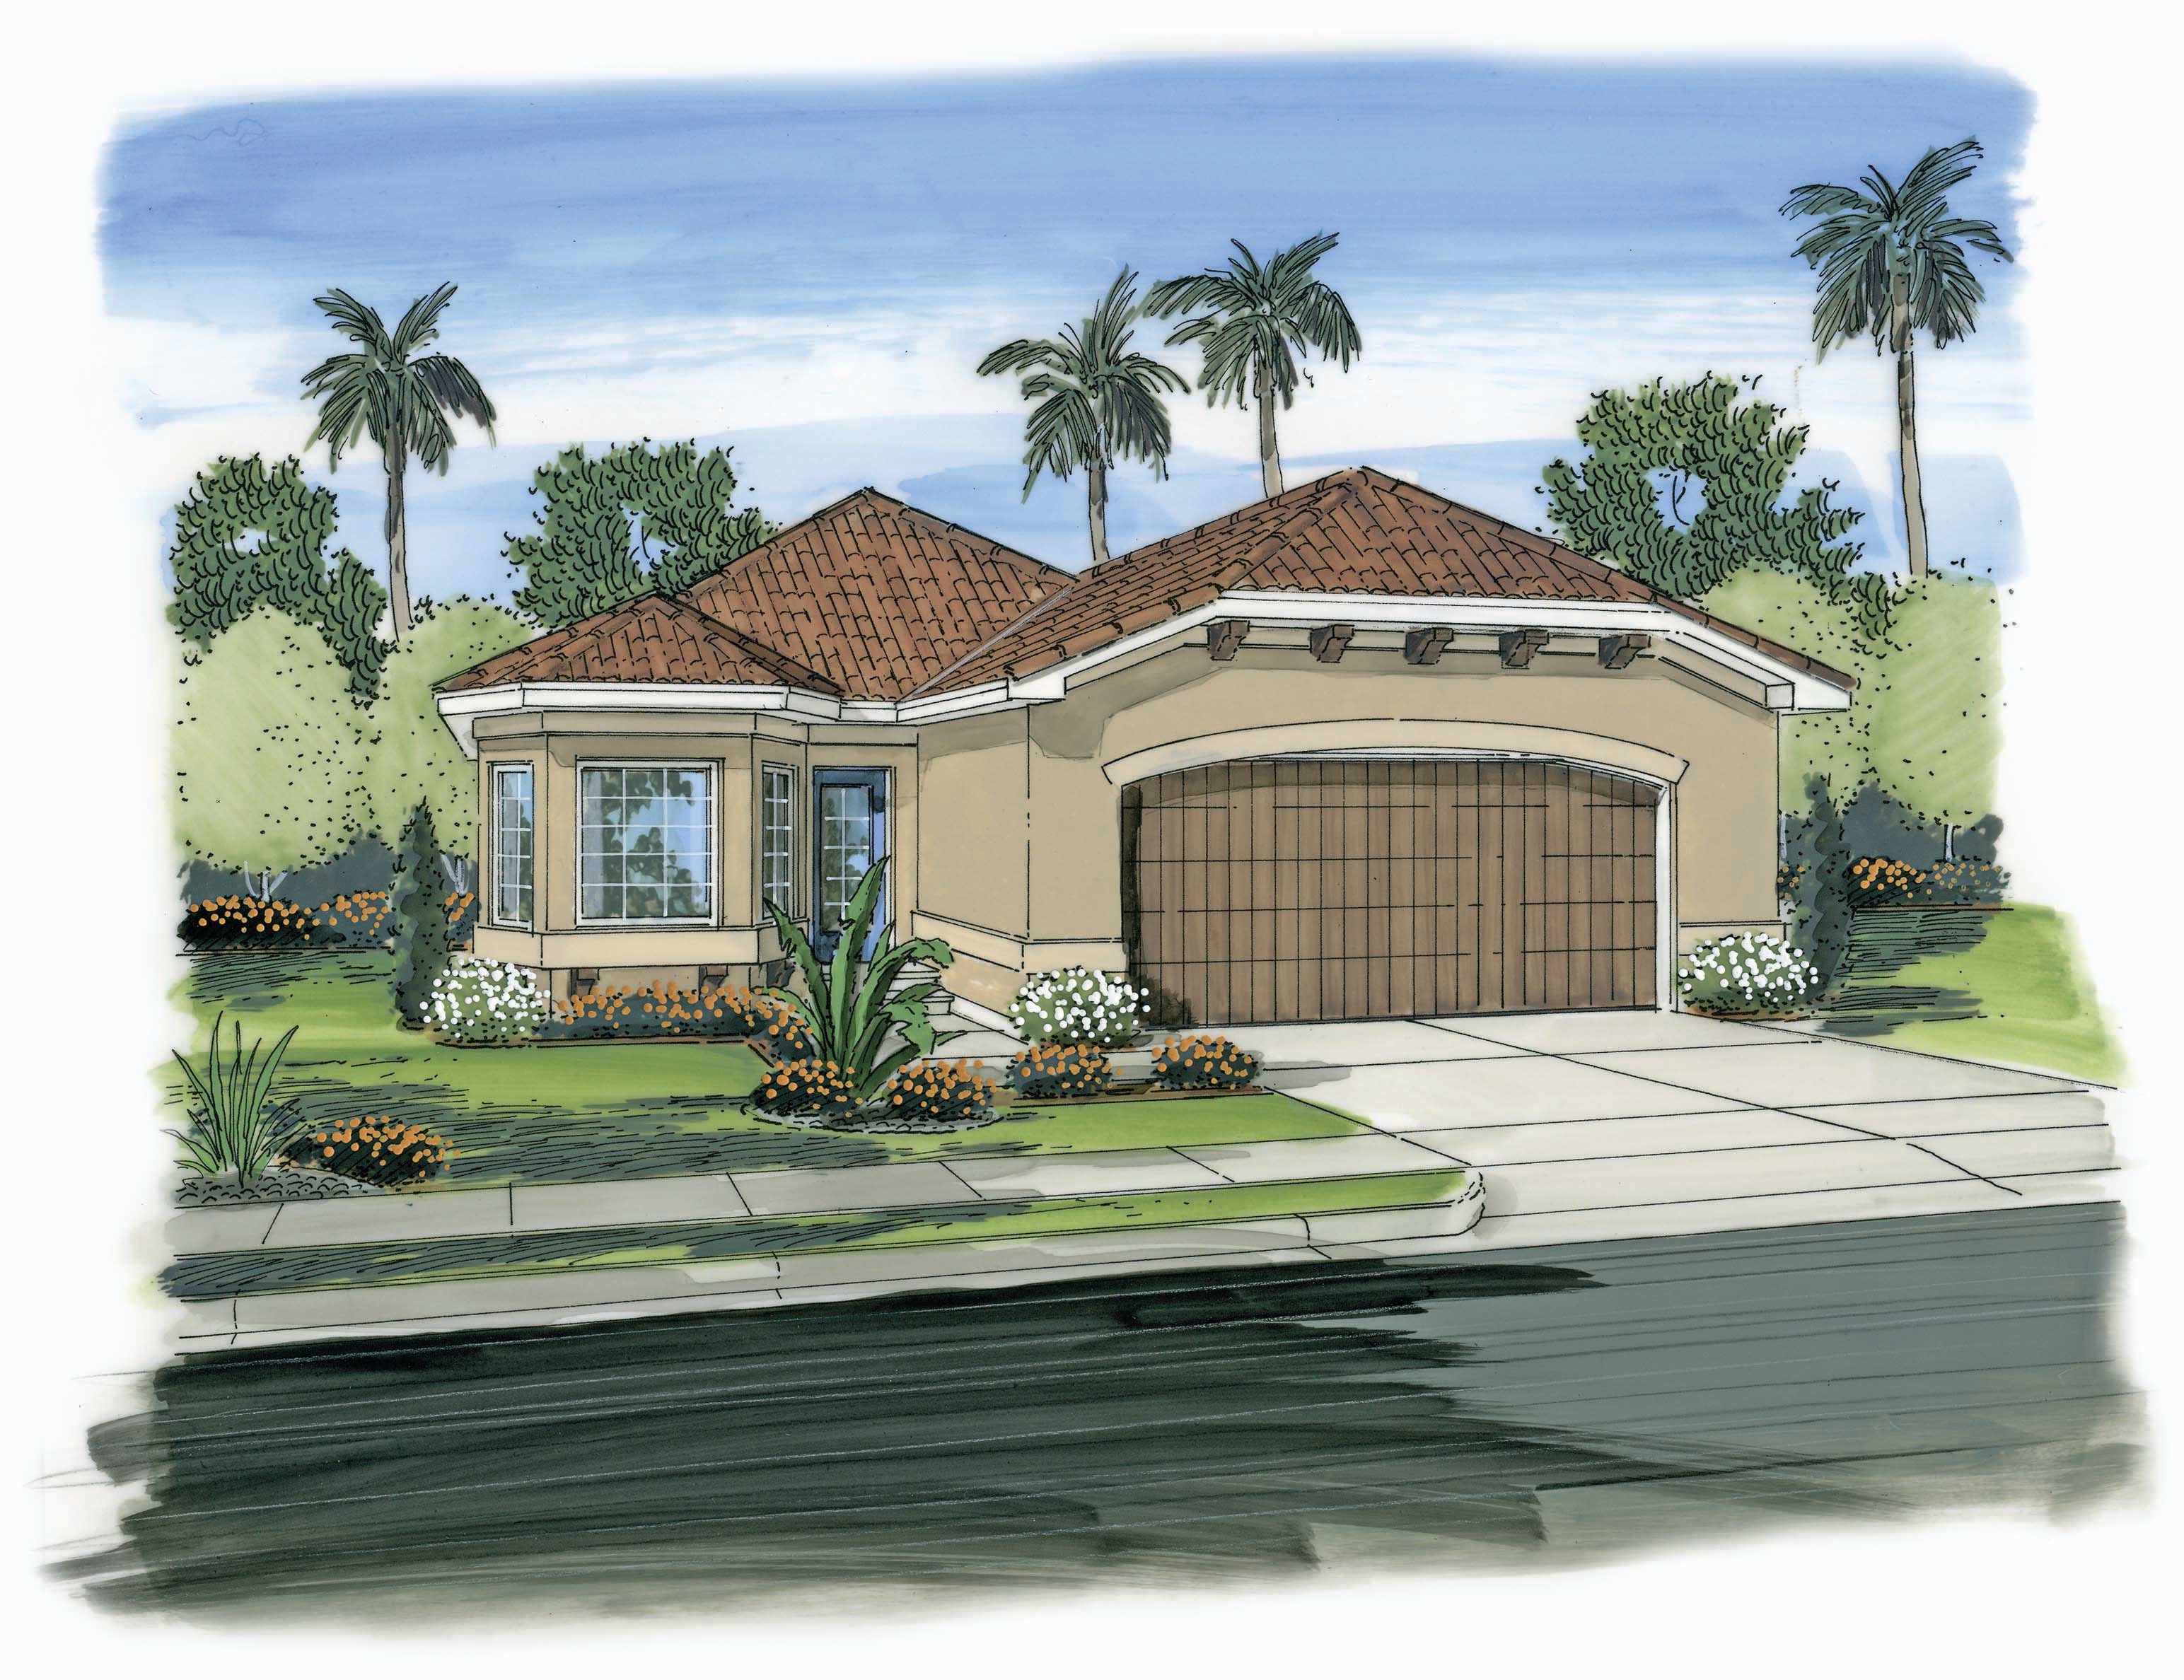 California Style - Southwest Home with 3 Bedrooms, 1304 Sq Ft | Floor